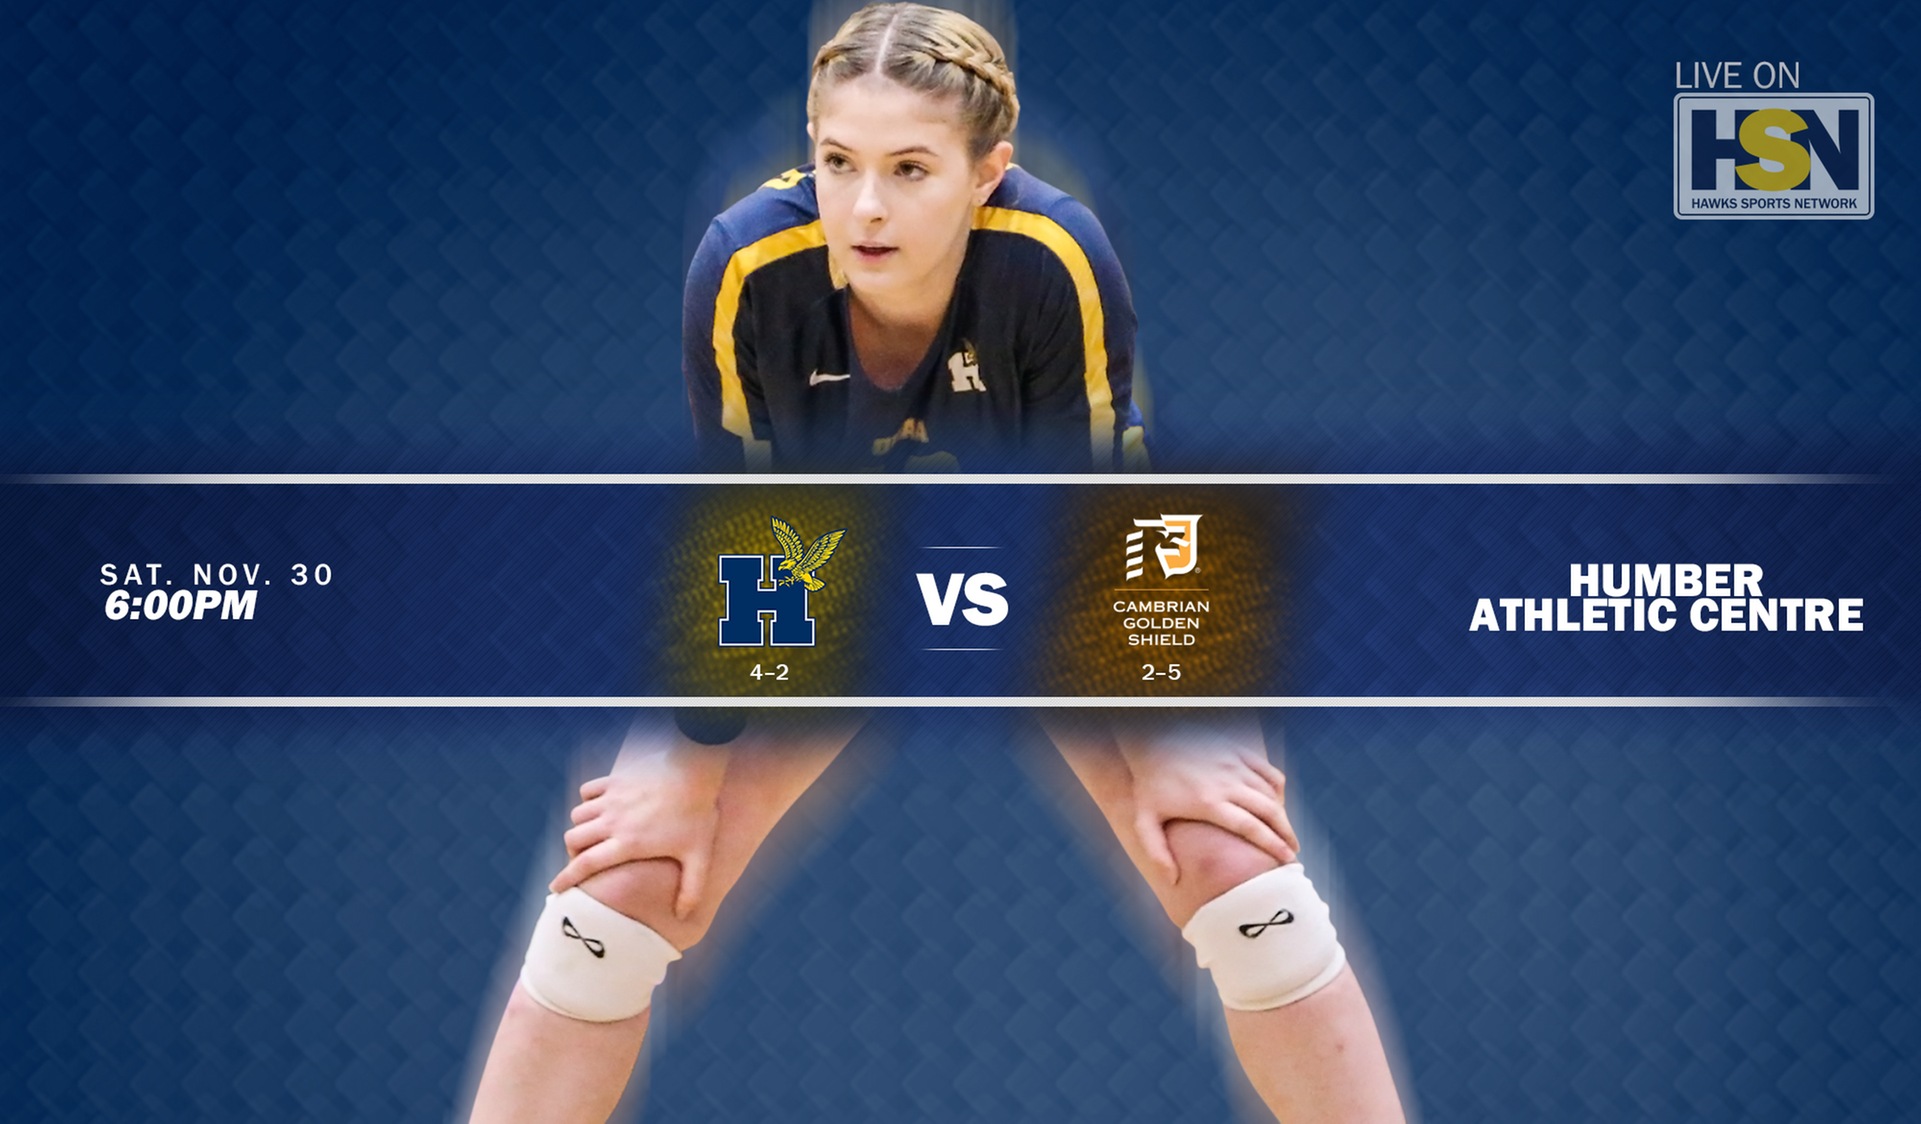 Weekend Doubleheader on Tap for No. 15 Women's Volleyball